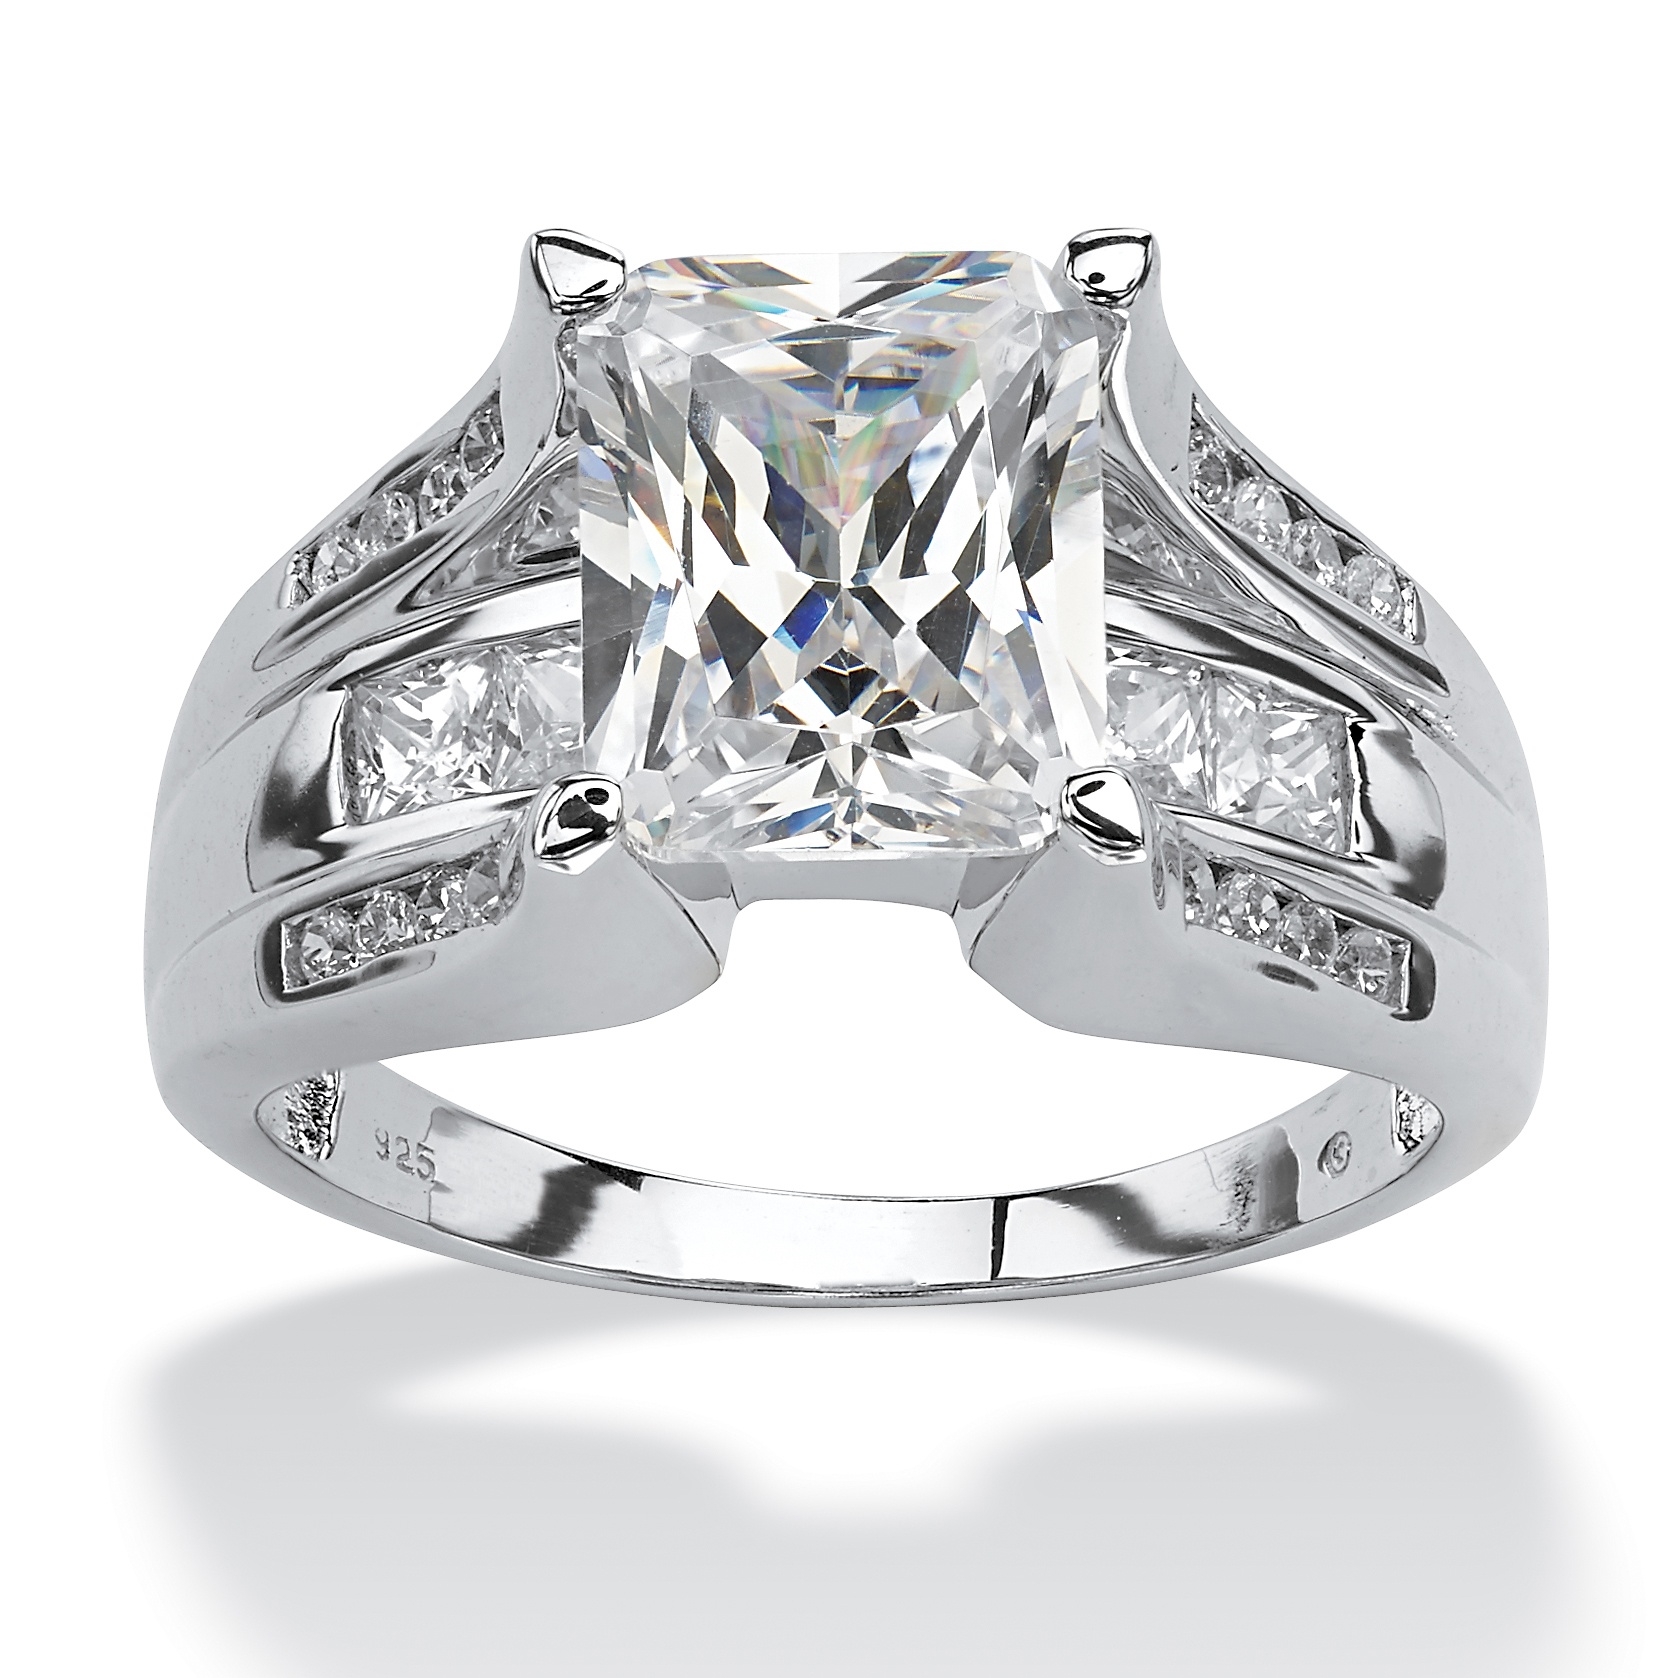 485 Tcw Emerald Cut Cubic Zirconia Ring In Platinum Over Sterling Silver At Palmbeach Jewelry